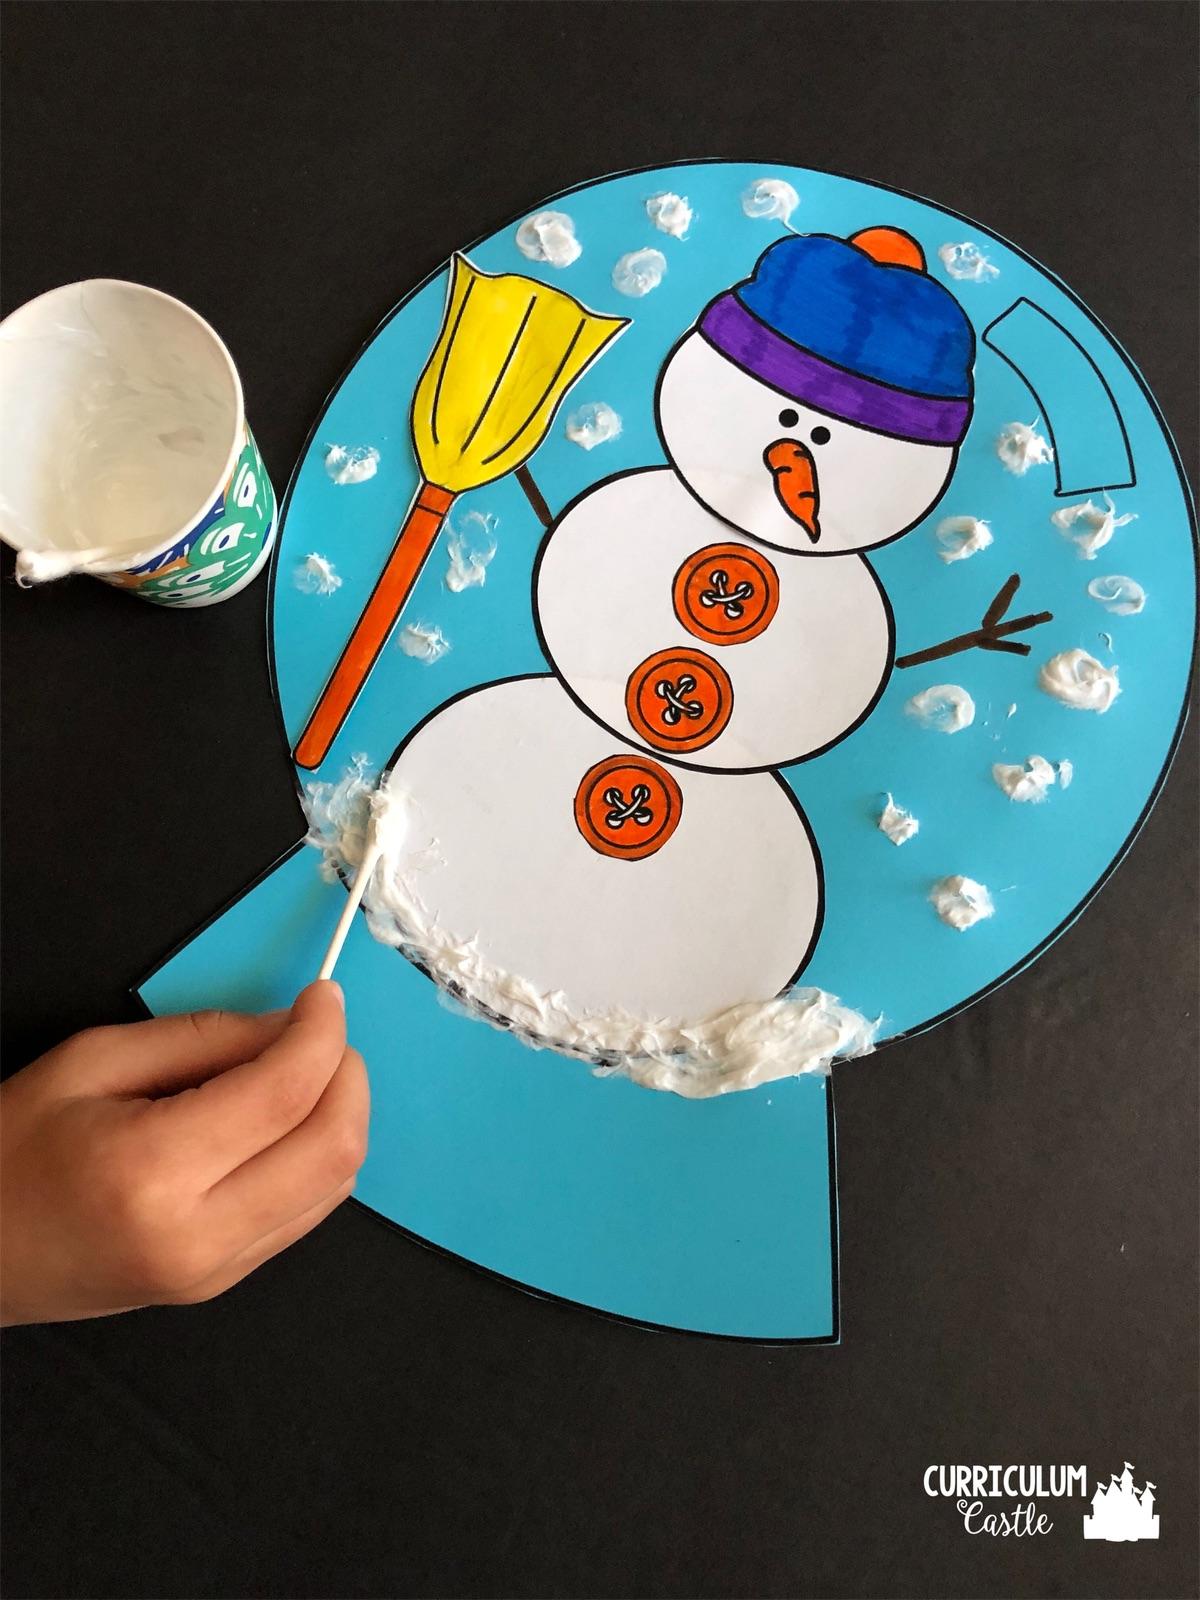 How to Draw a Painting Snowman for Your Winter Homeschool - You